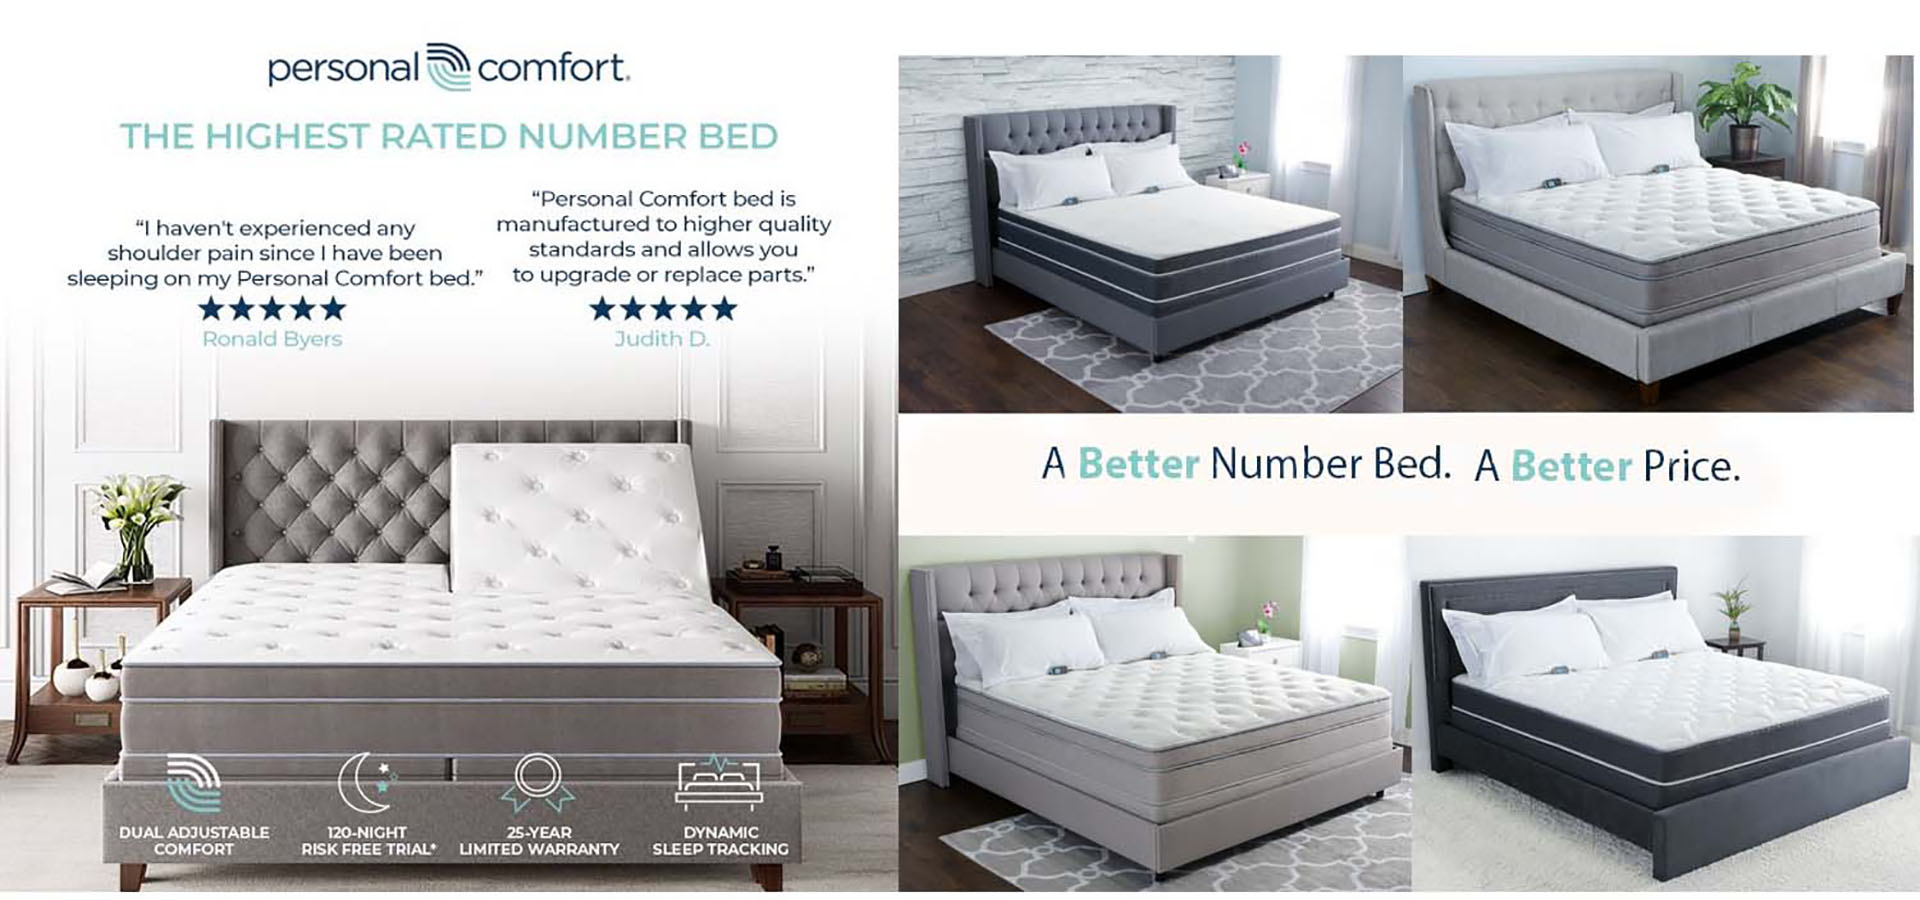 personal comfort bed stores near me